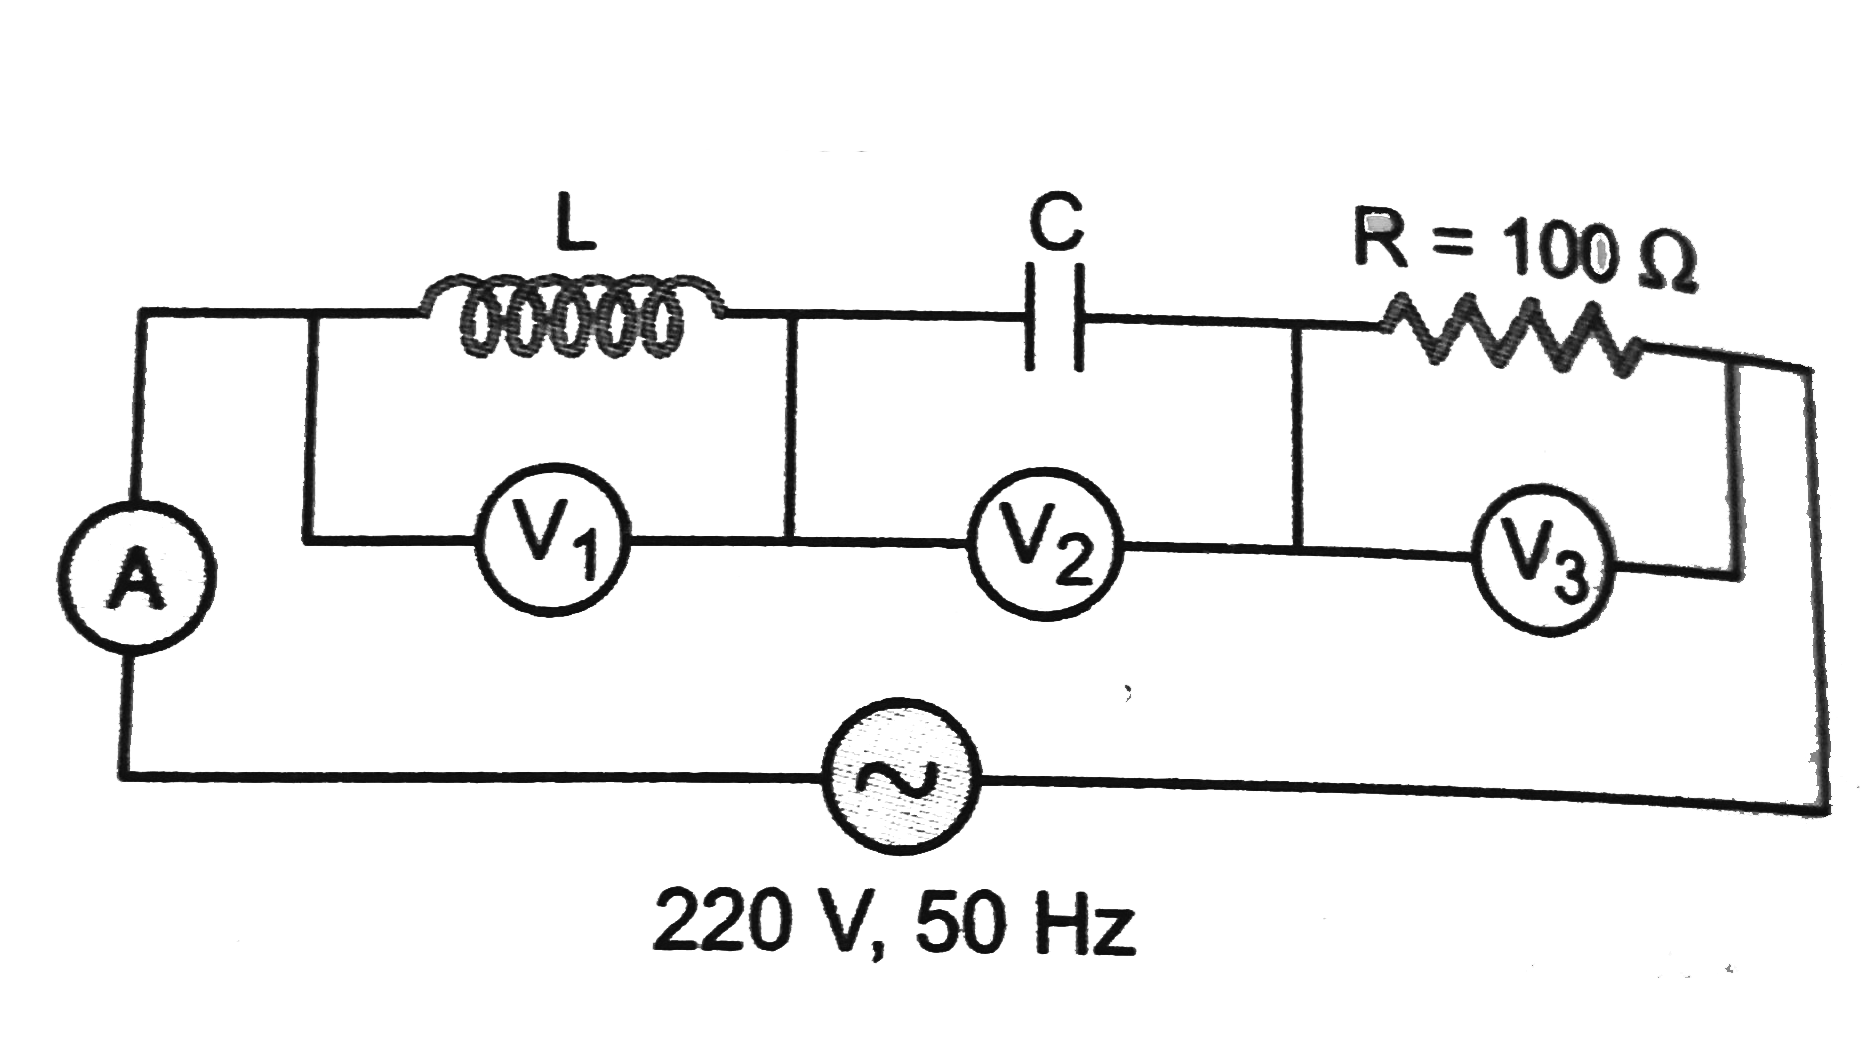 In the given circuit, Fig., the reading of voltmeter V(1) and V(2) 300 votls each. The reading of the voltemeter V(3) and ammeter A are respectively